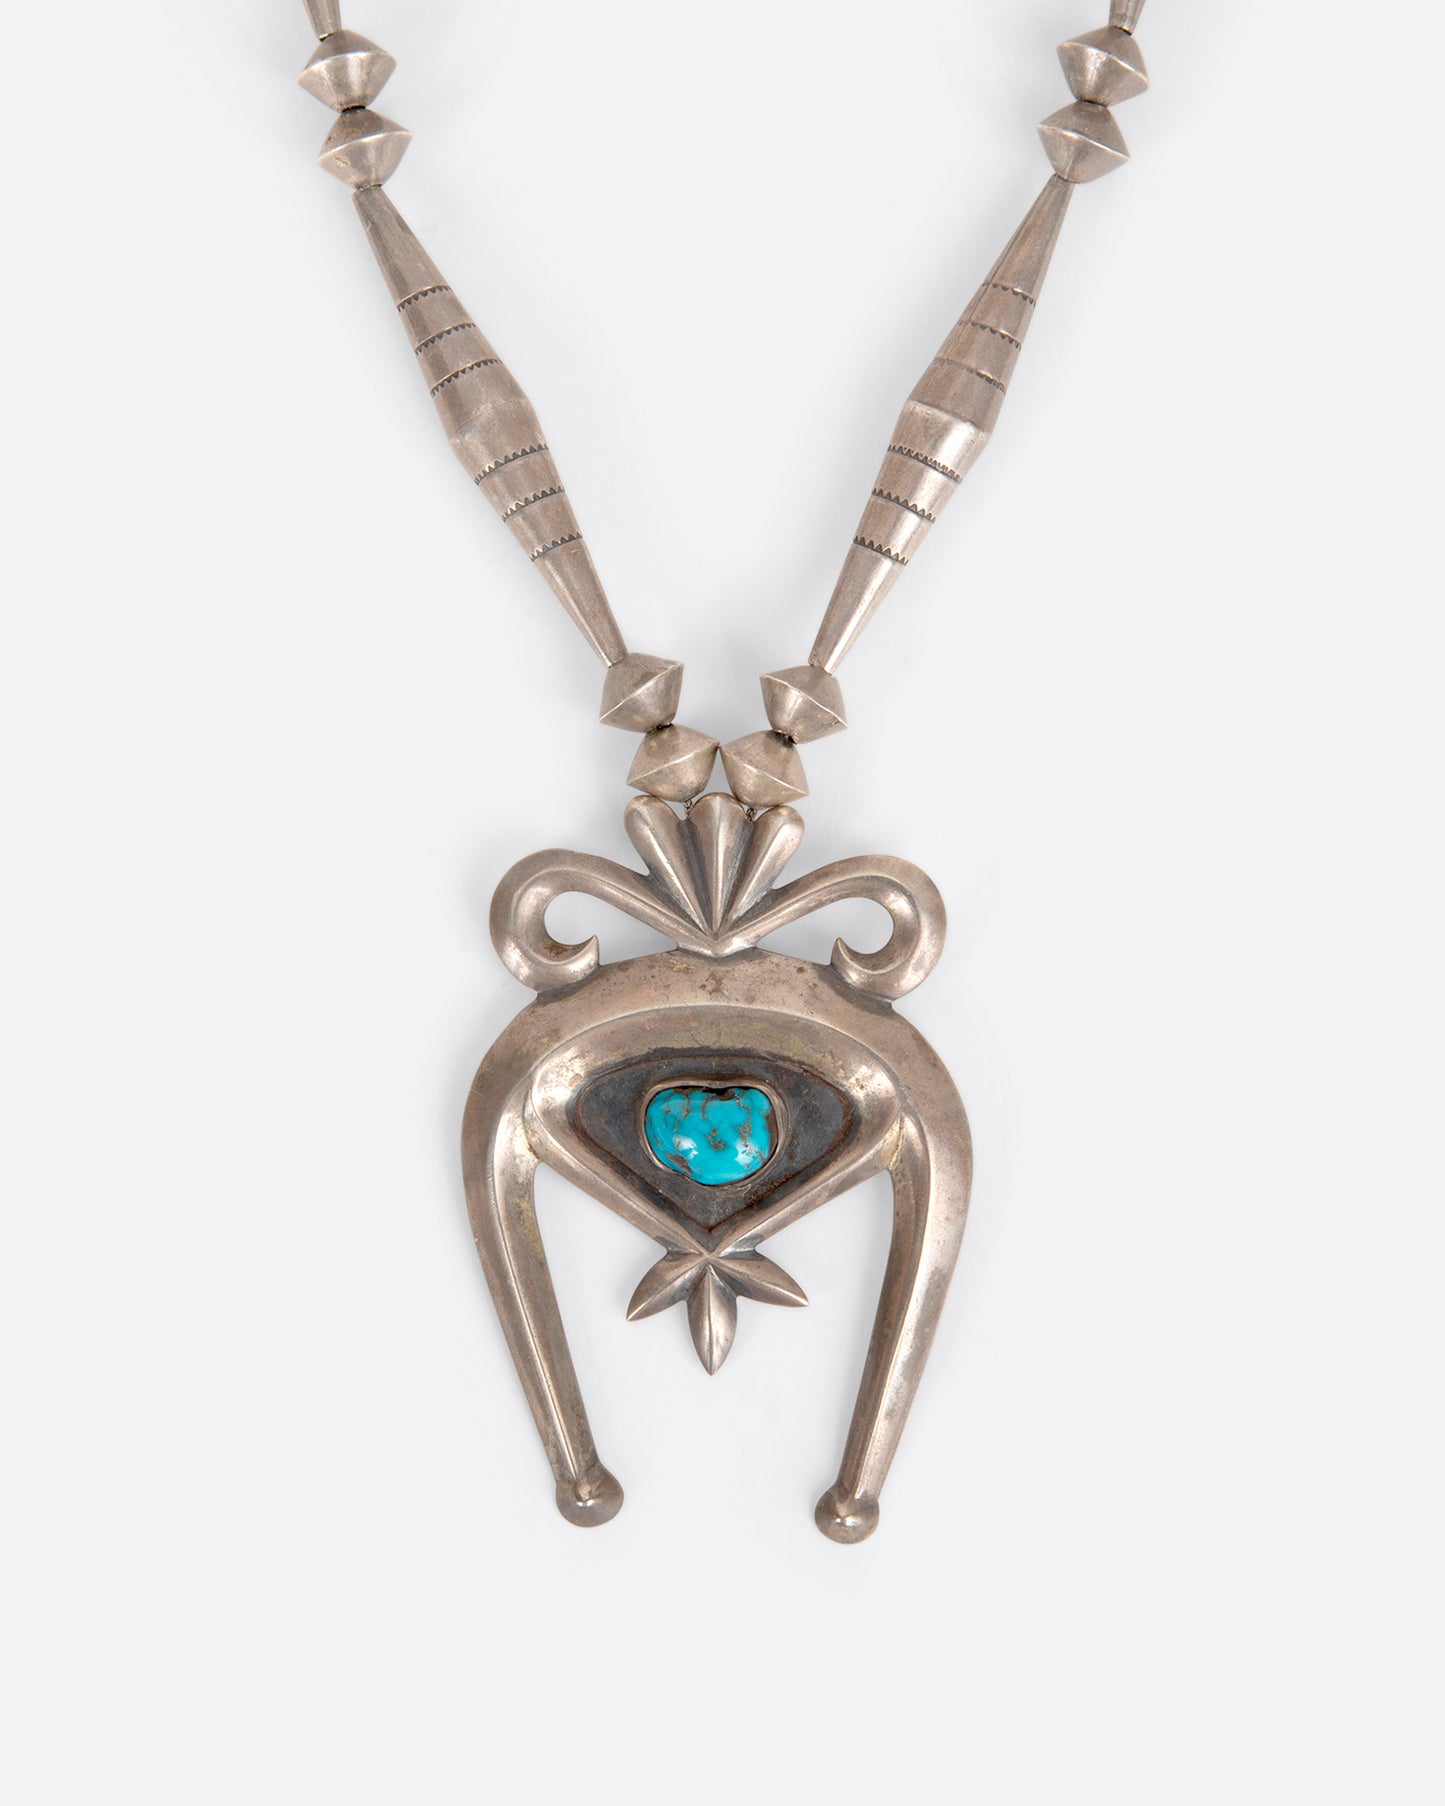 A vintage silver naja necklace with a turquoise stone at the center of the pendant, shown from the front.